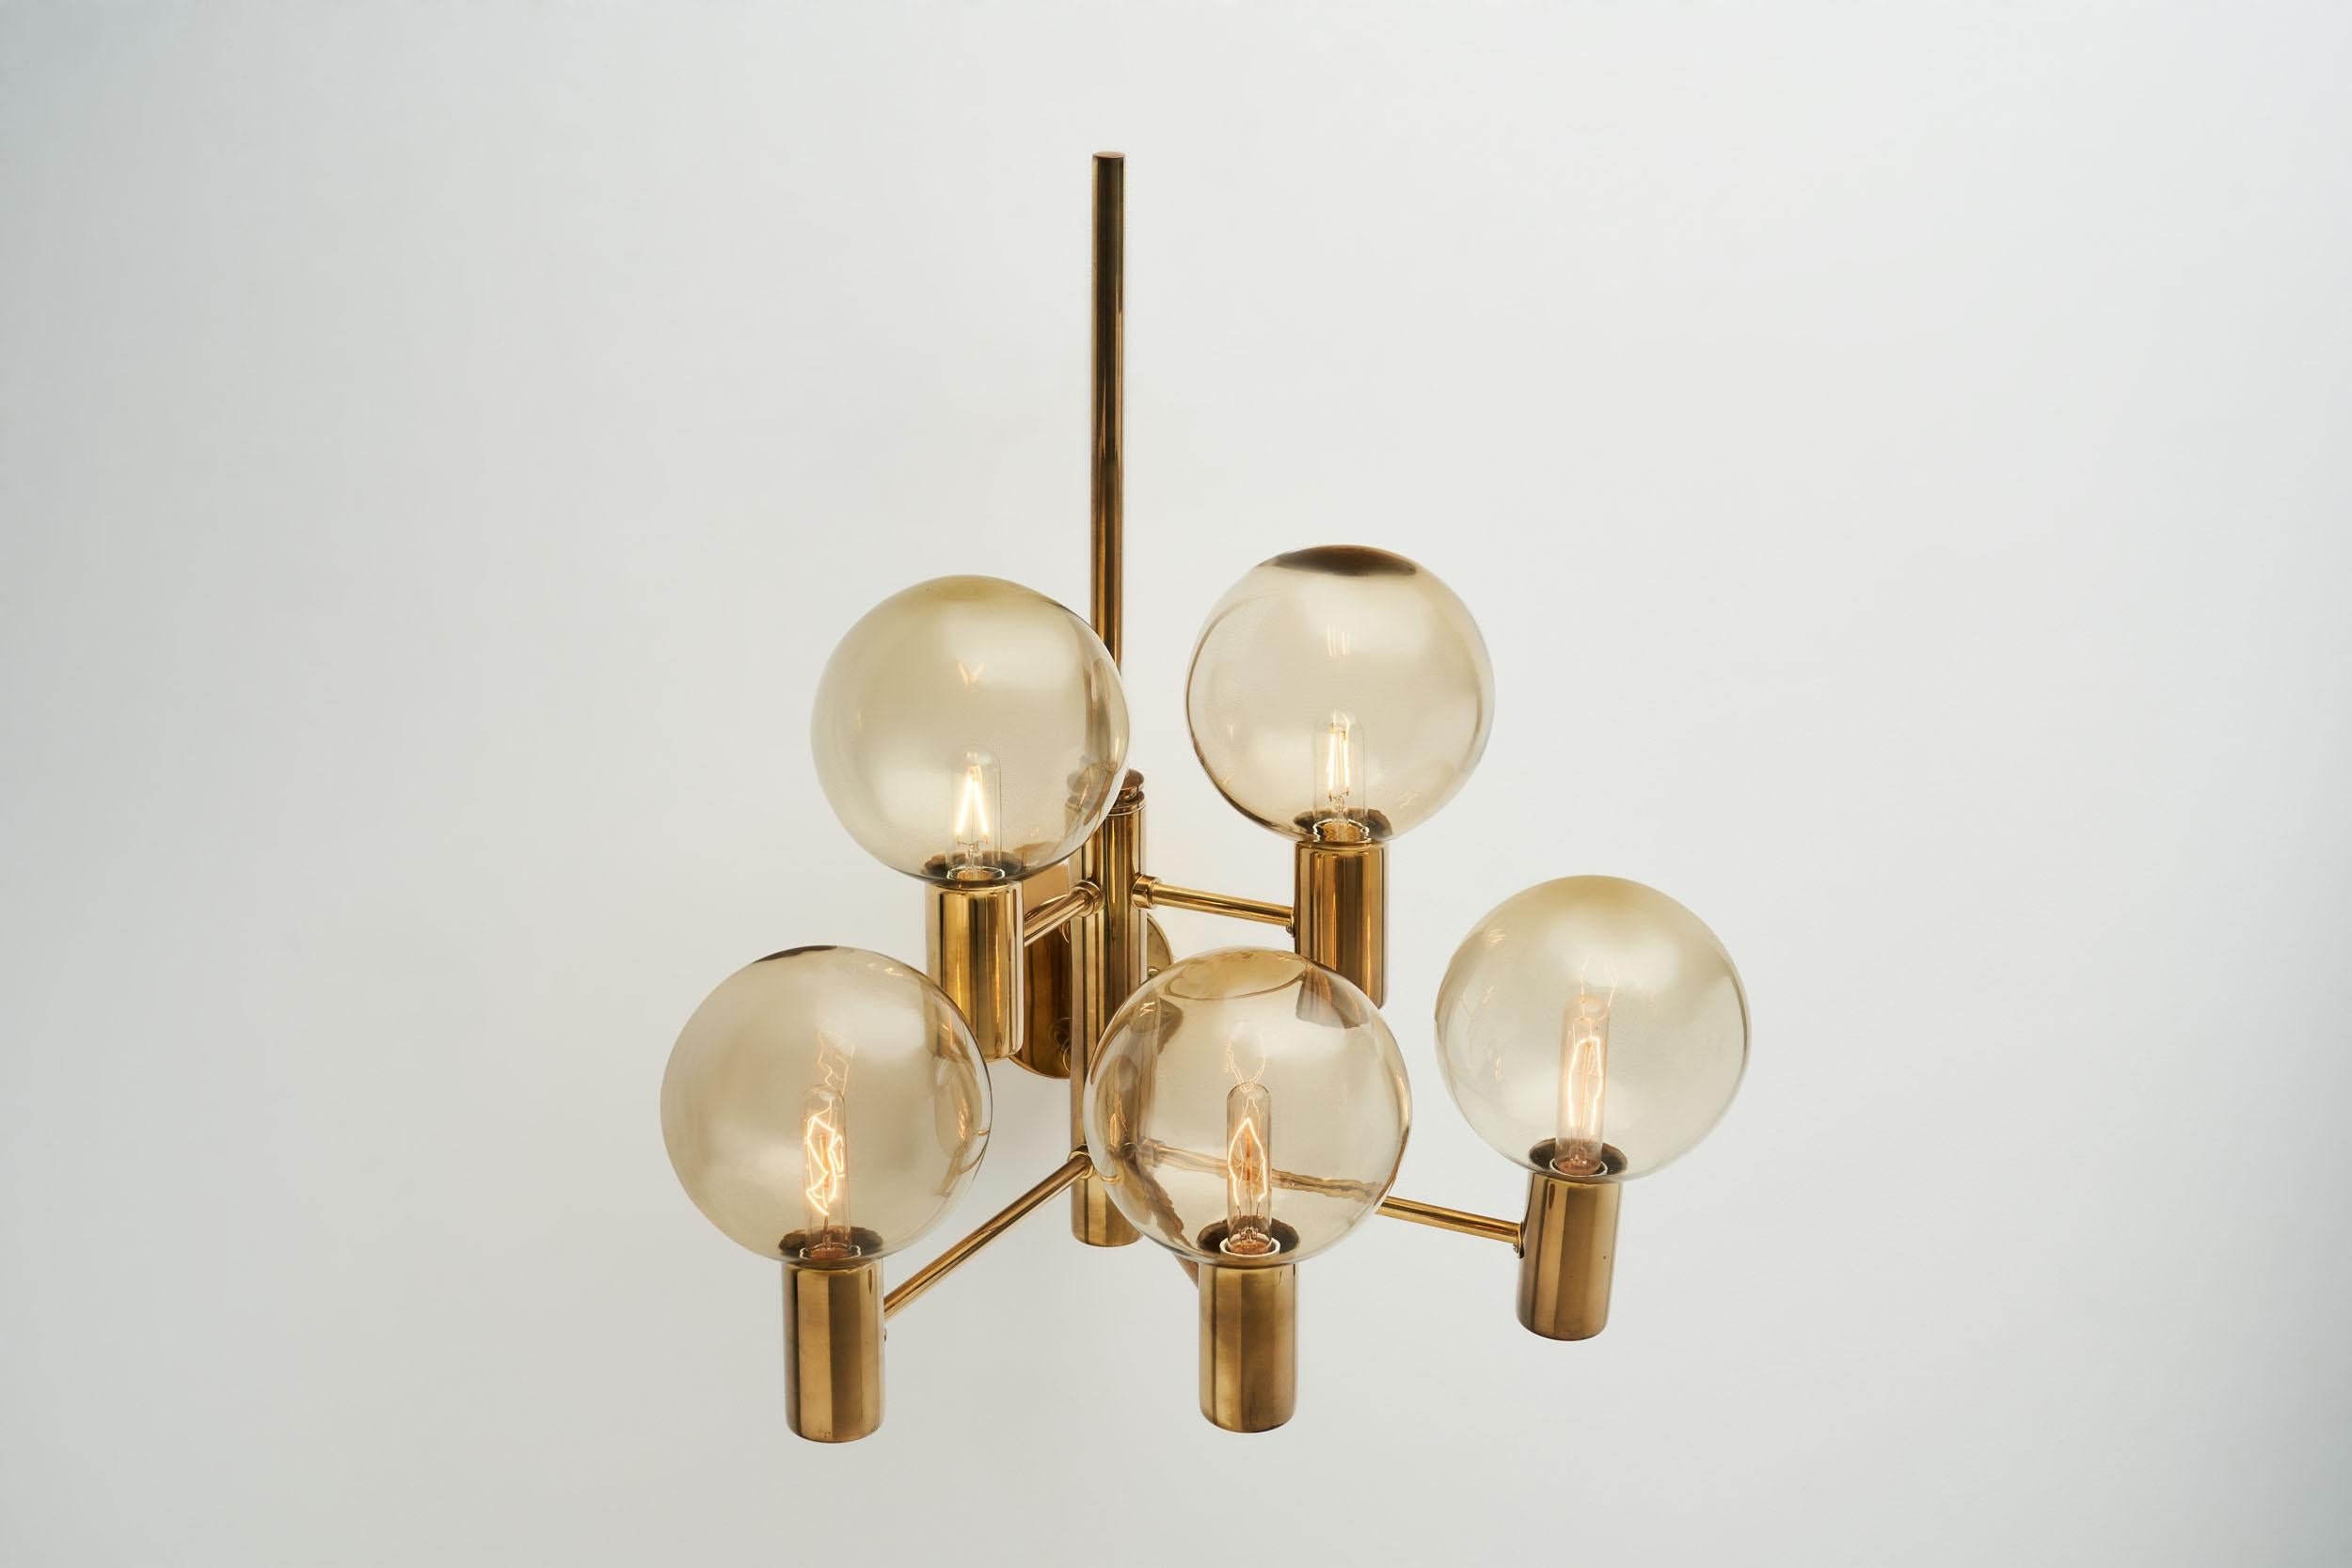 Hans-Agne Jakobsson Brass Wall Lamp with Smoked Glass Shades, Sweden, 1960s For Sale 4